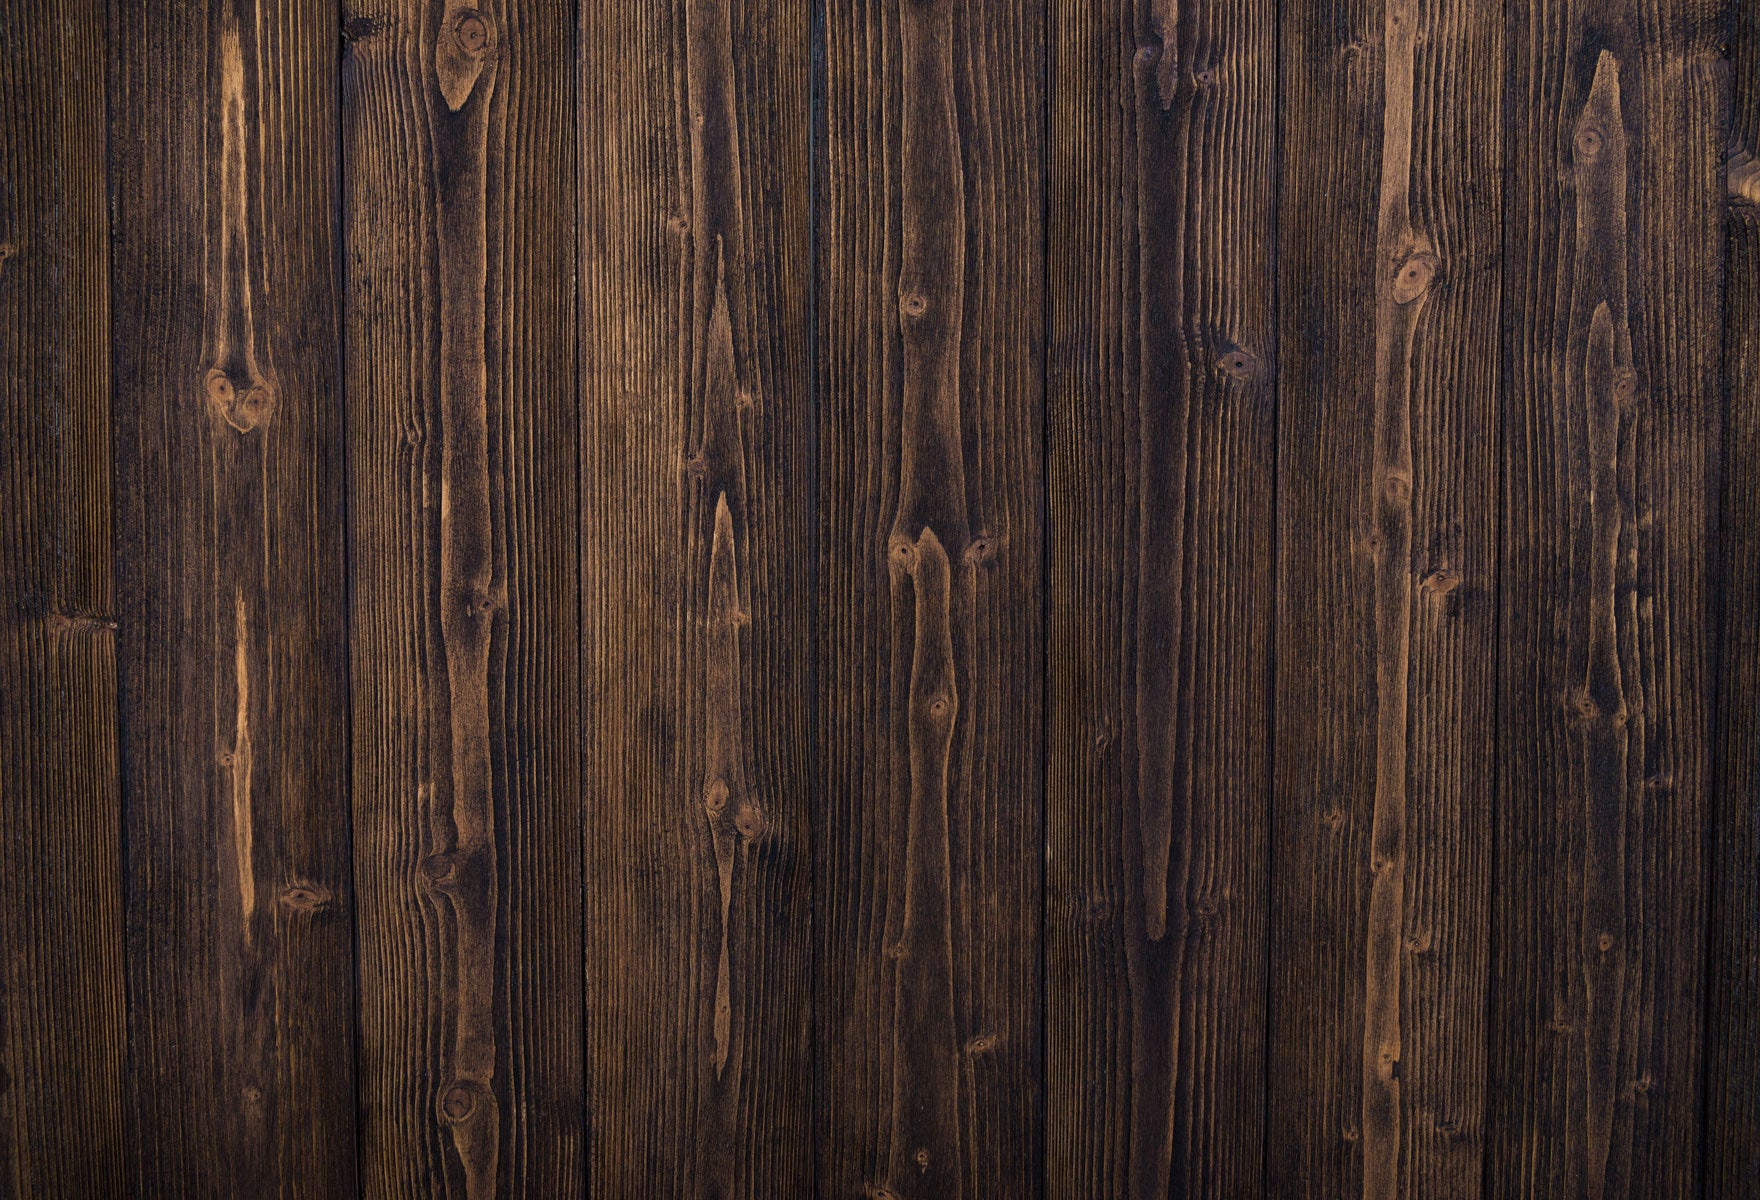 Kate Dark Brown wood floor Backdrop for Photography